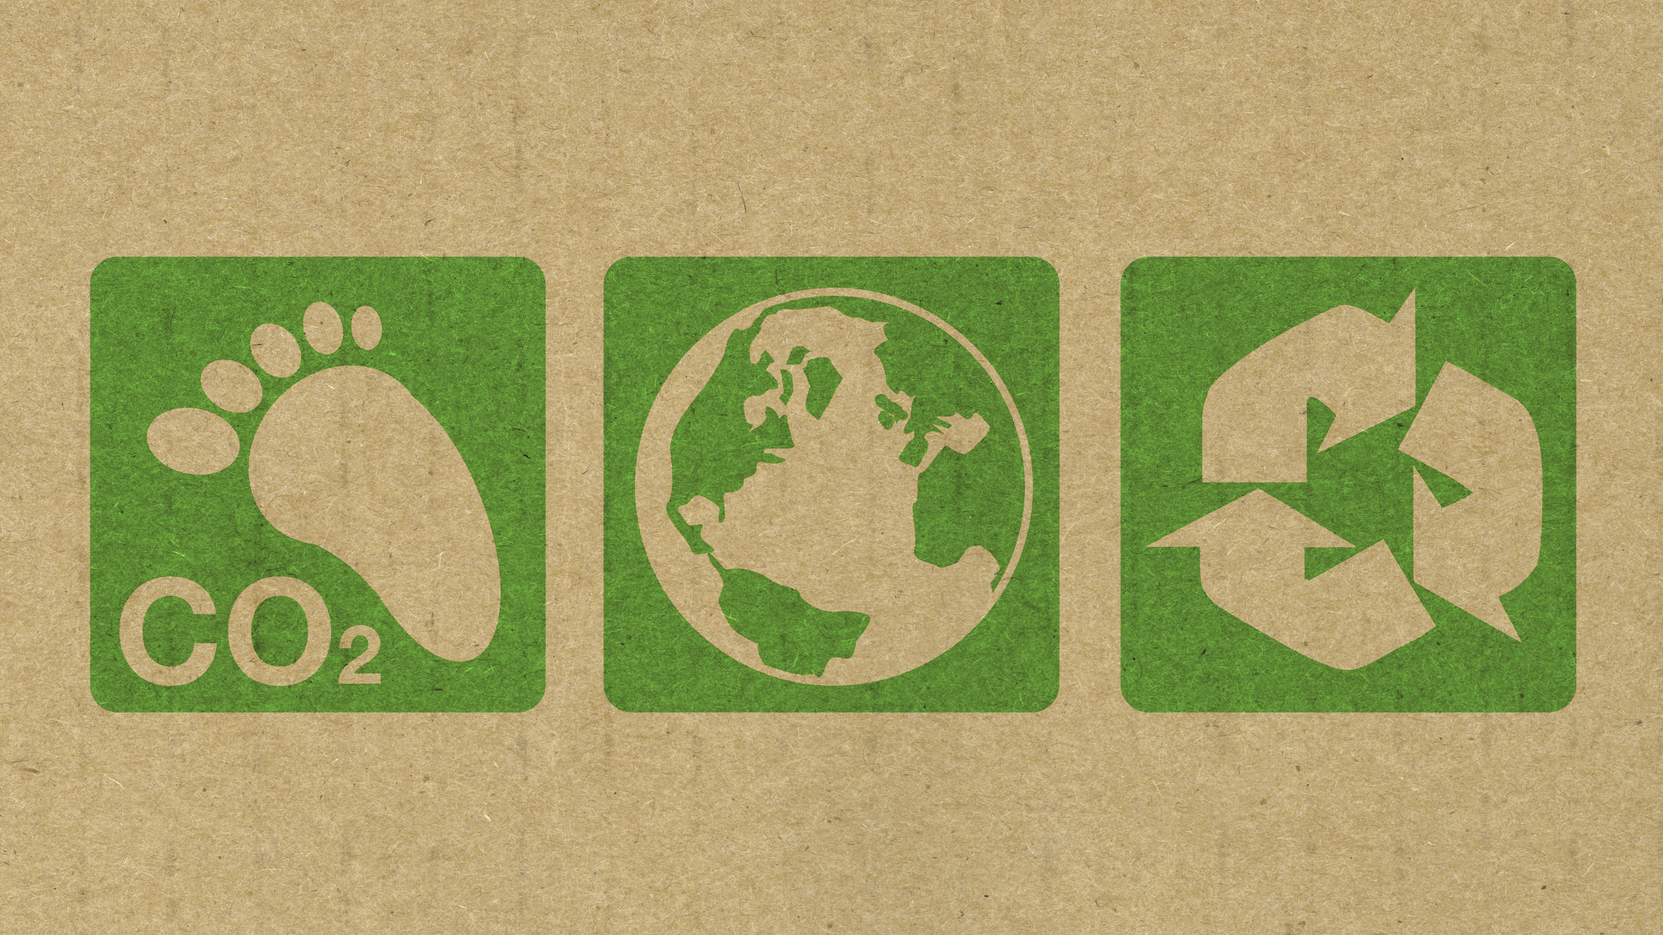 Green environment symbols stamped onto the side of recycled cardboard.